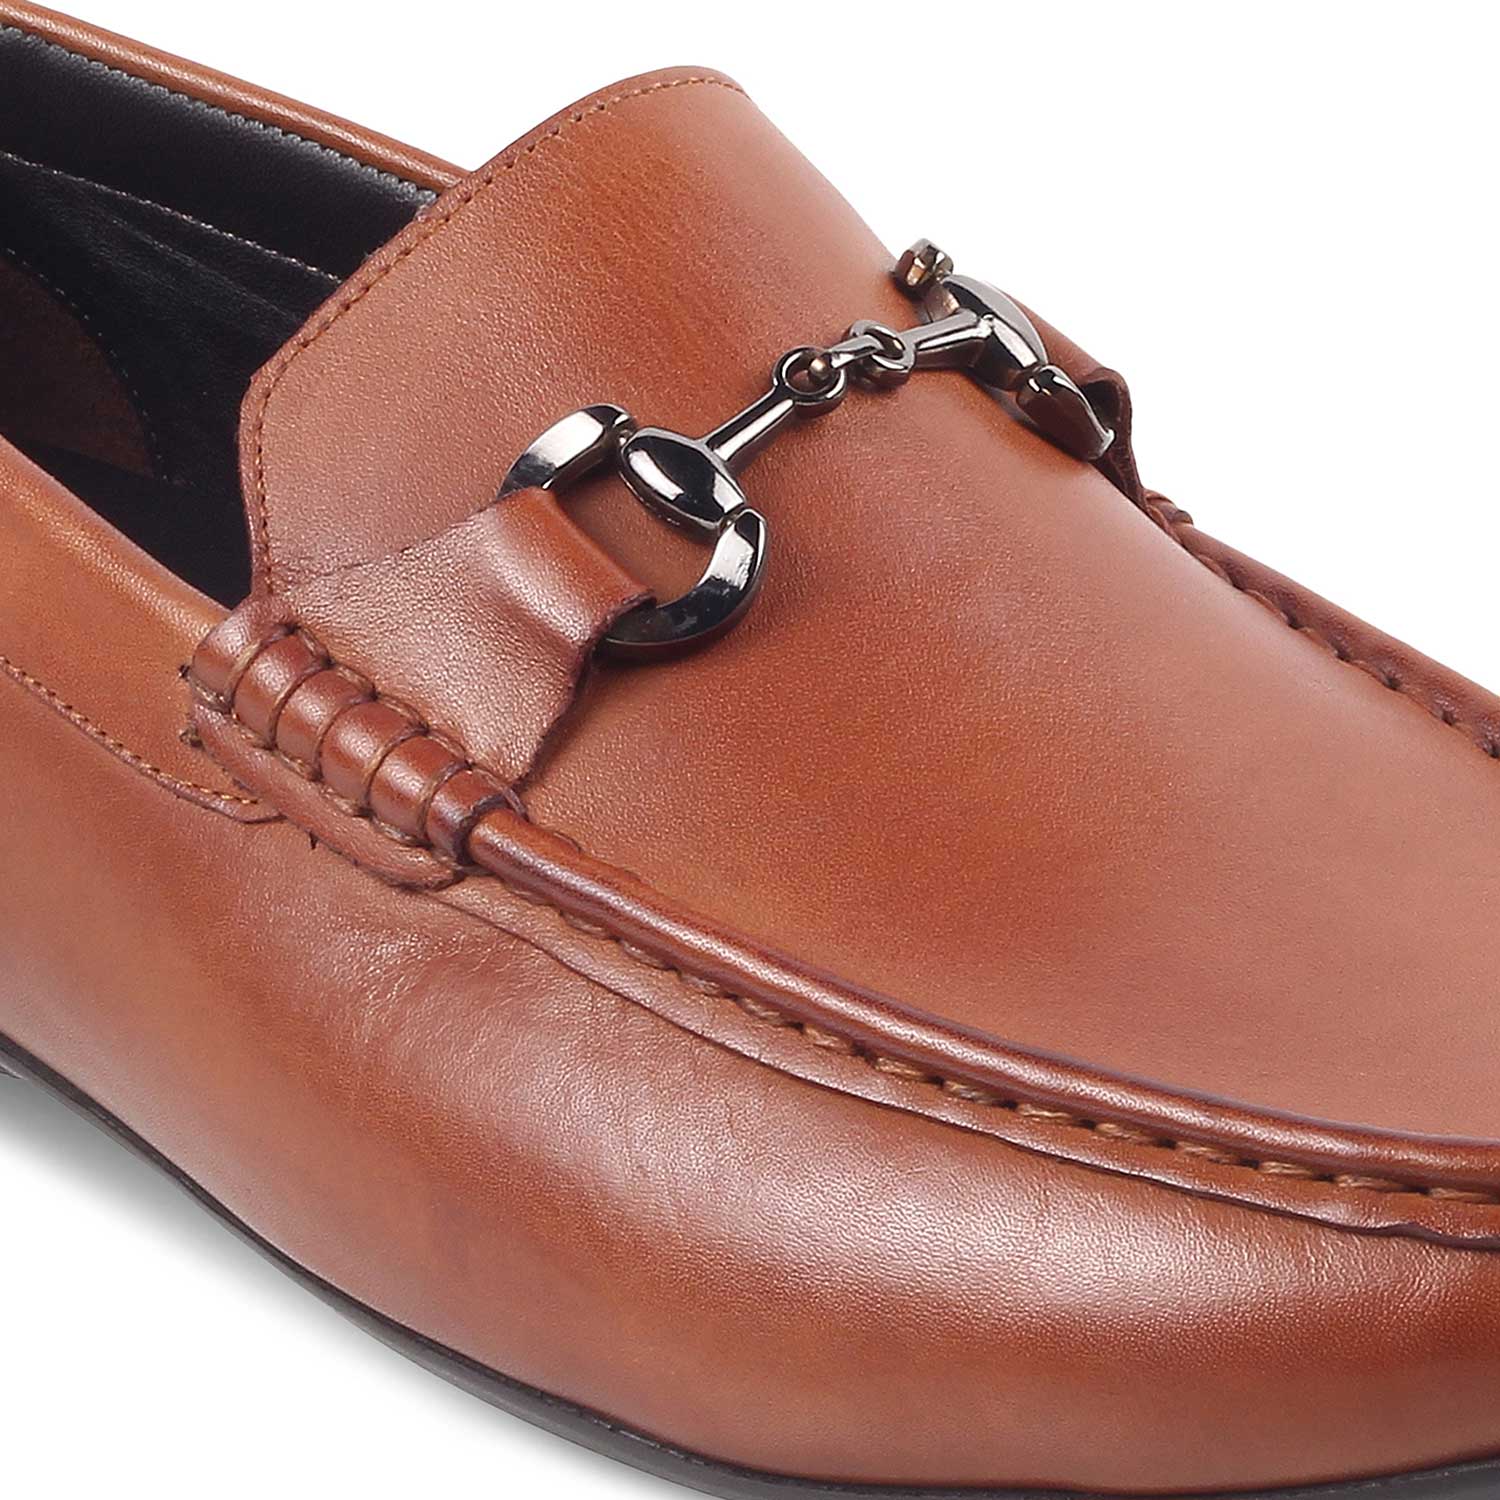 The Votterdam Tan Men's Leather Driving Loafers Tresmode - Tresmode